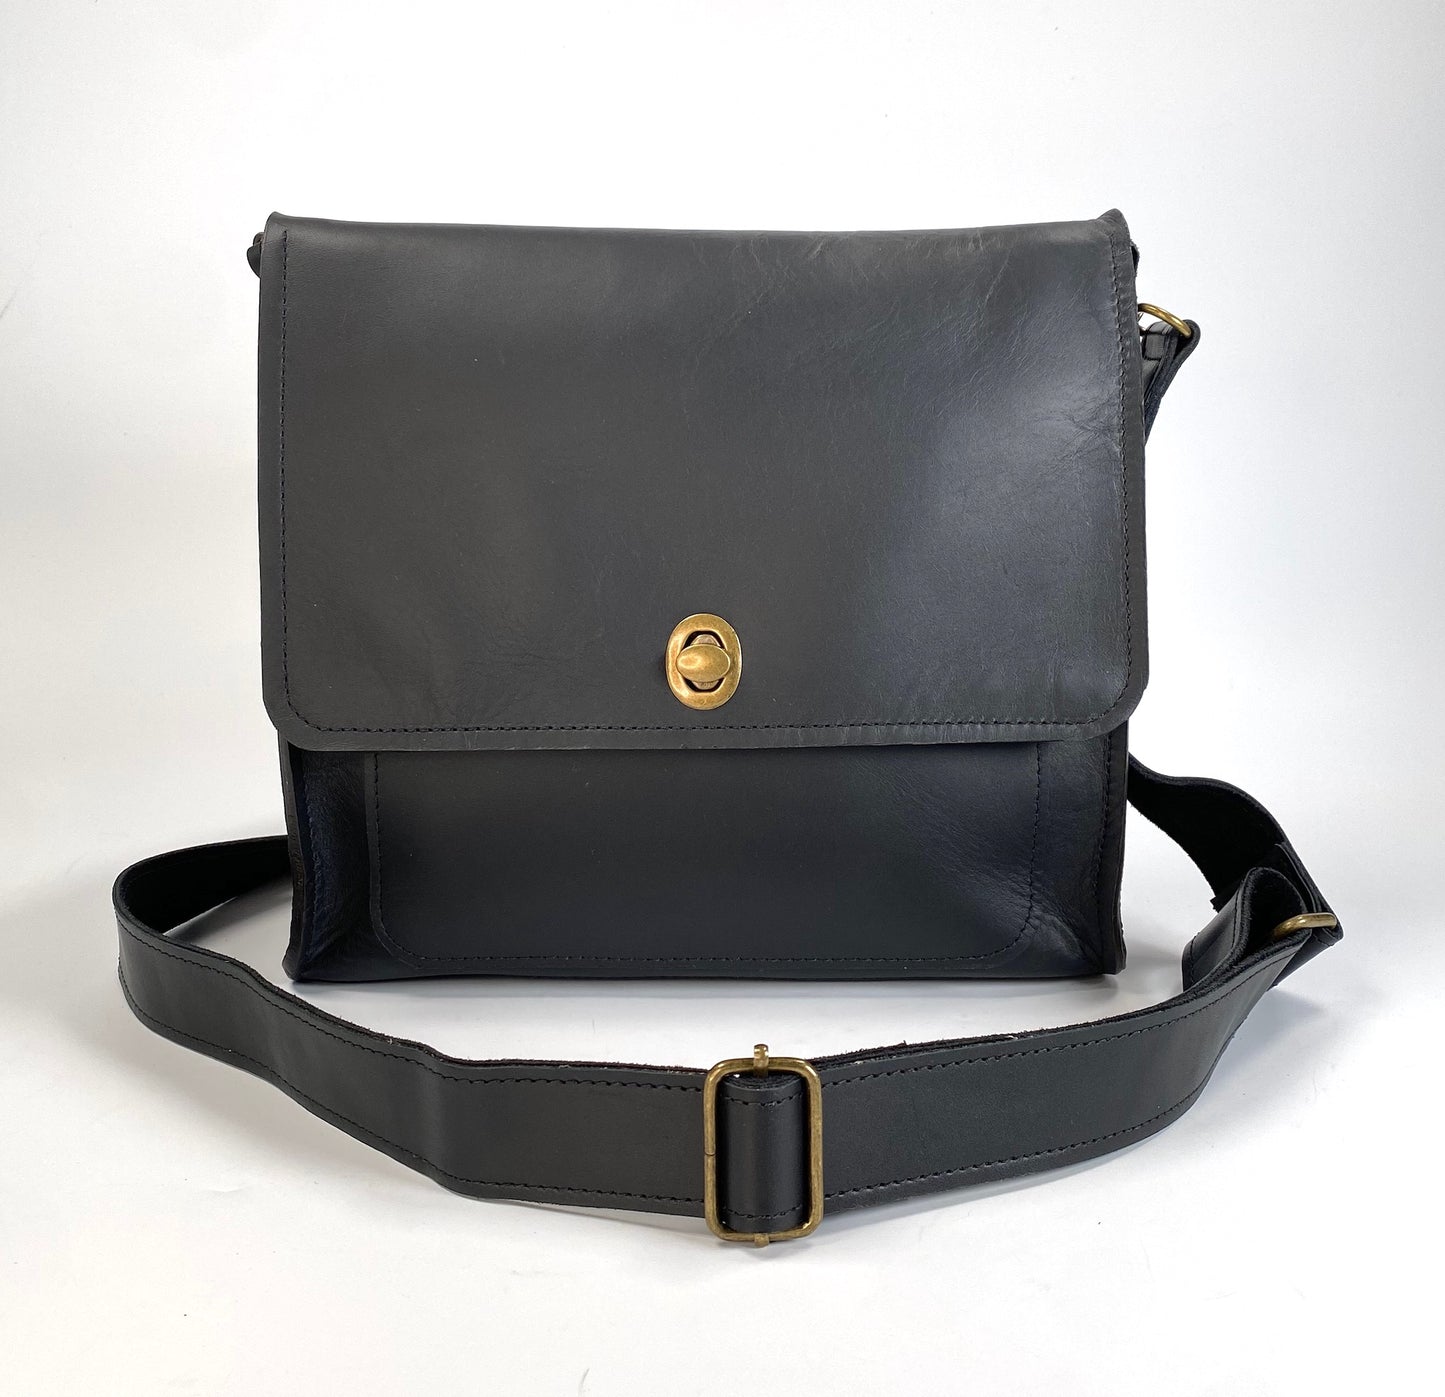 Leather Satchel Purse Hand Stitched in Black